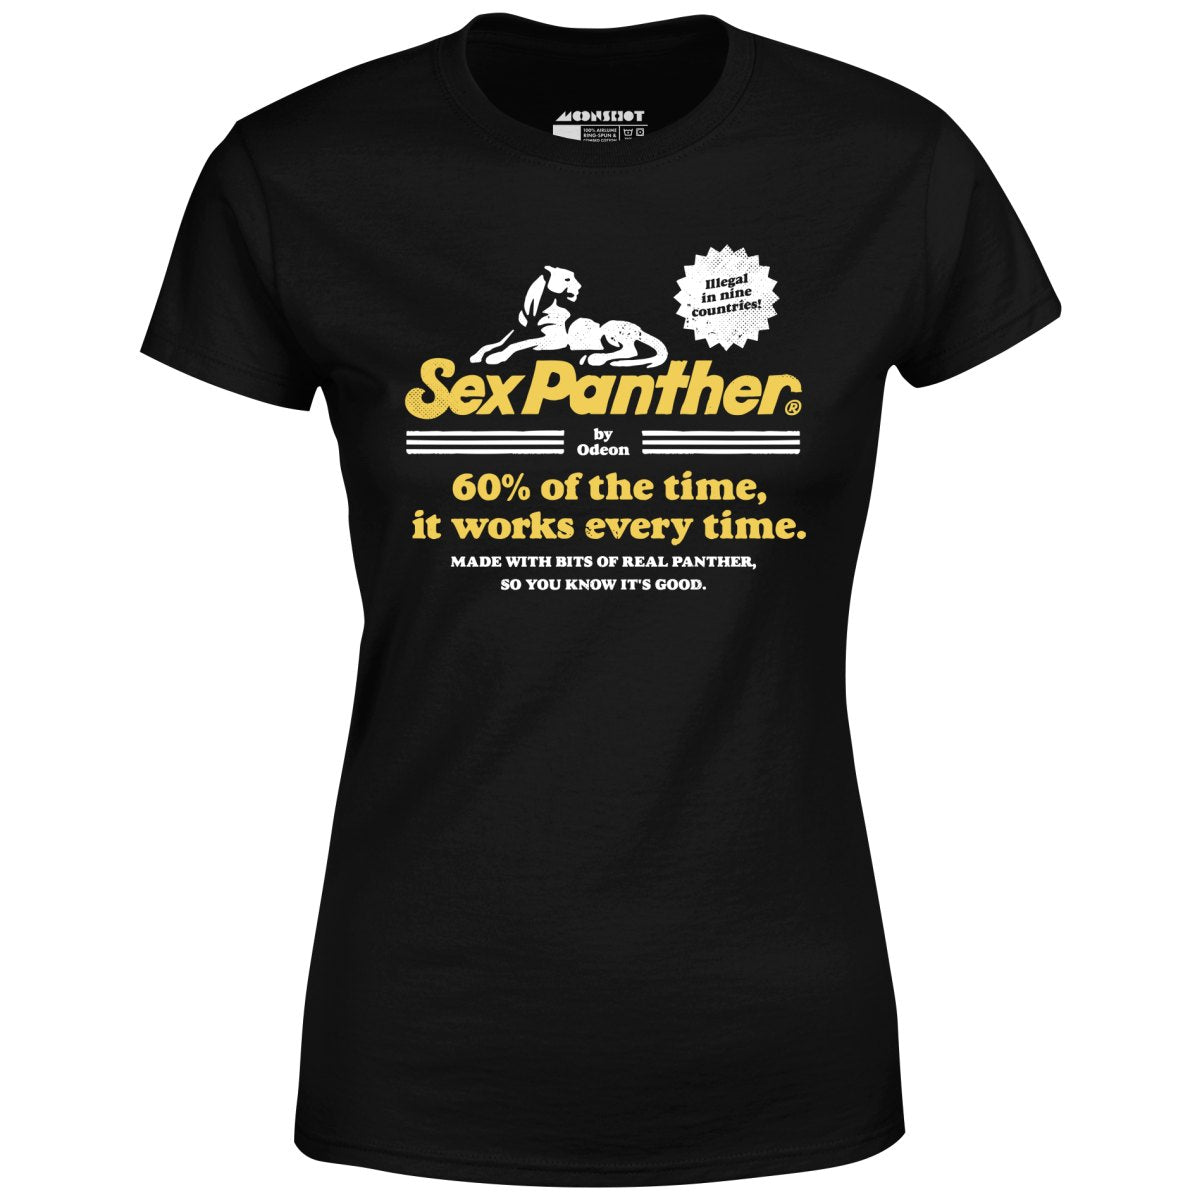 Sex Panther Cologne - Women's T-Shirt